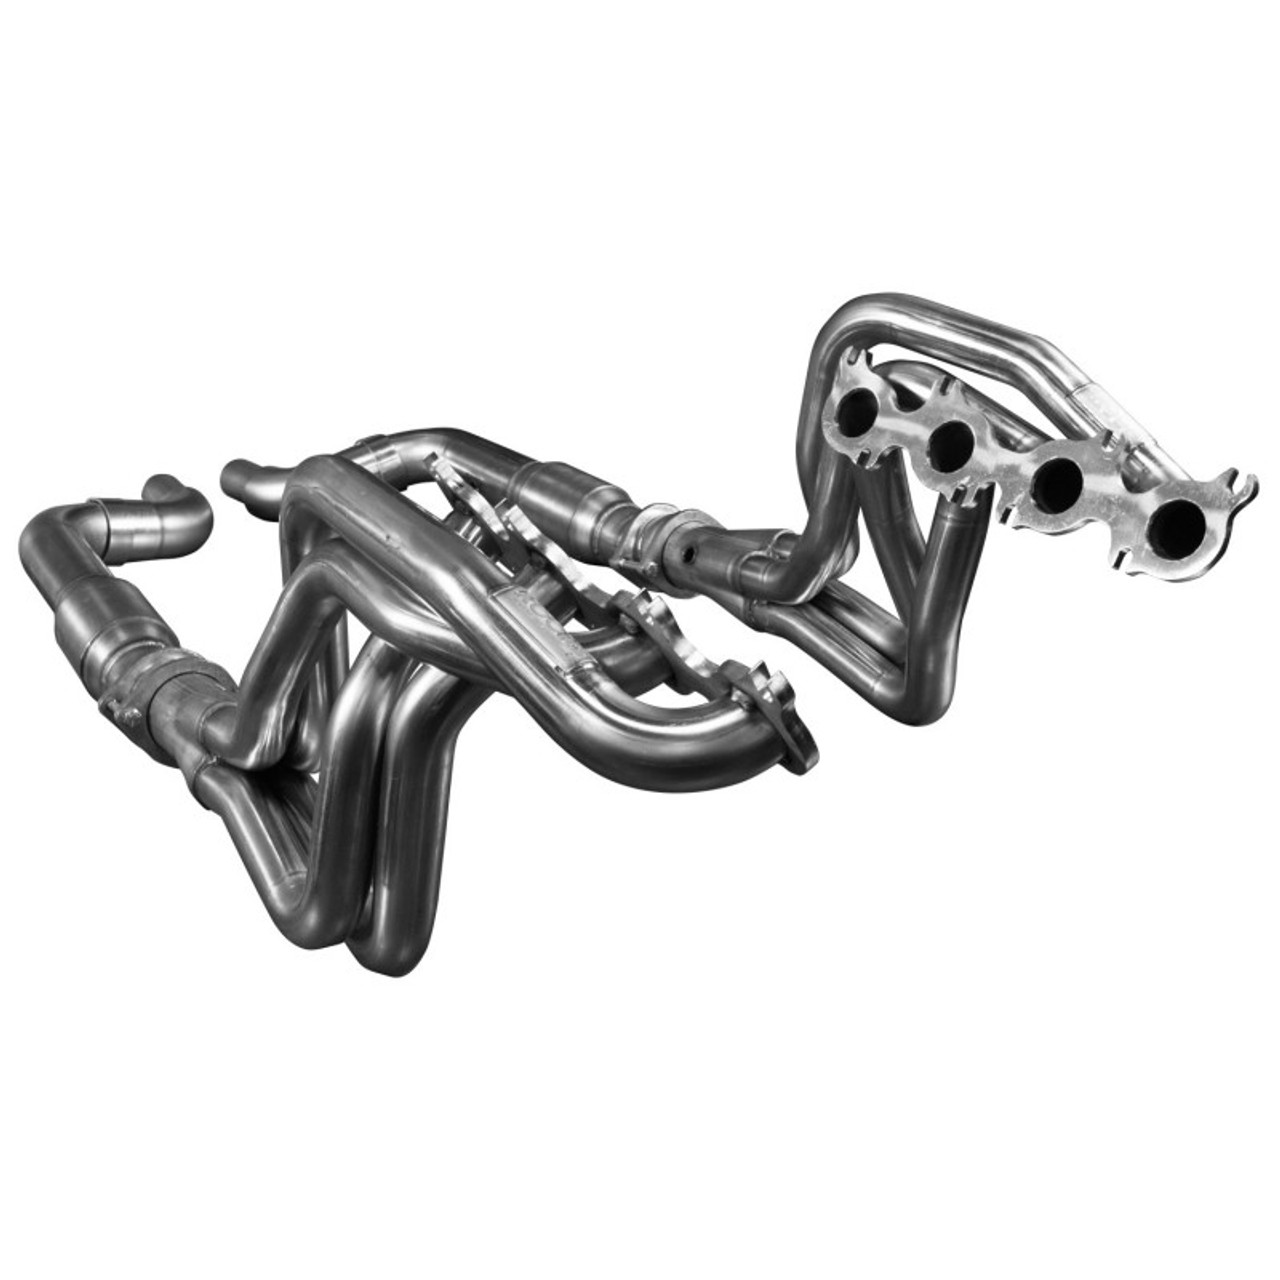 Kooks 1151H621 - Kooks 15+ Mustang 5.0L 4V 2in x 3in SS Headers w/Catted OEM Connection Pipe